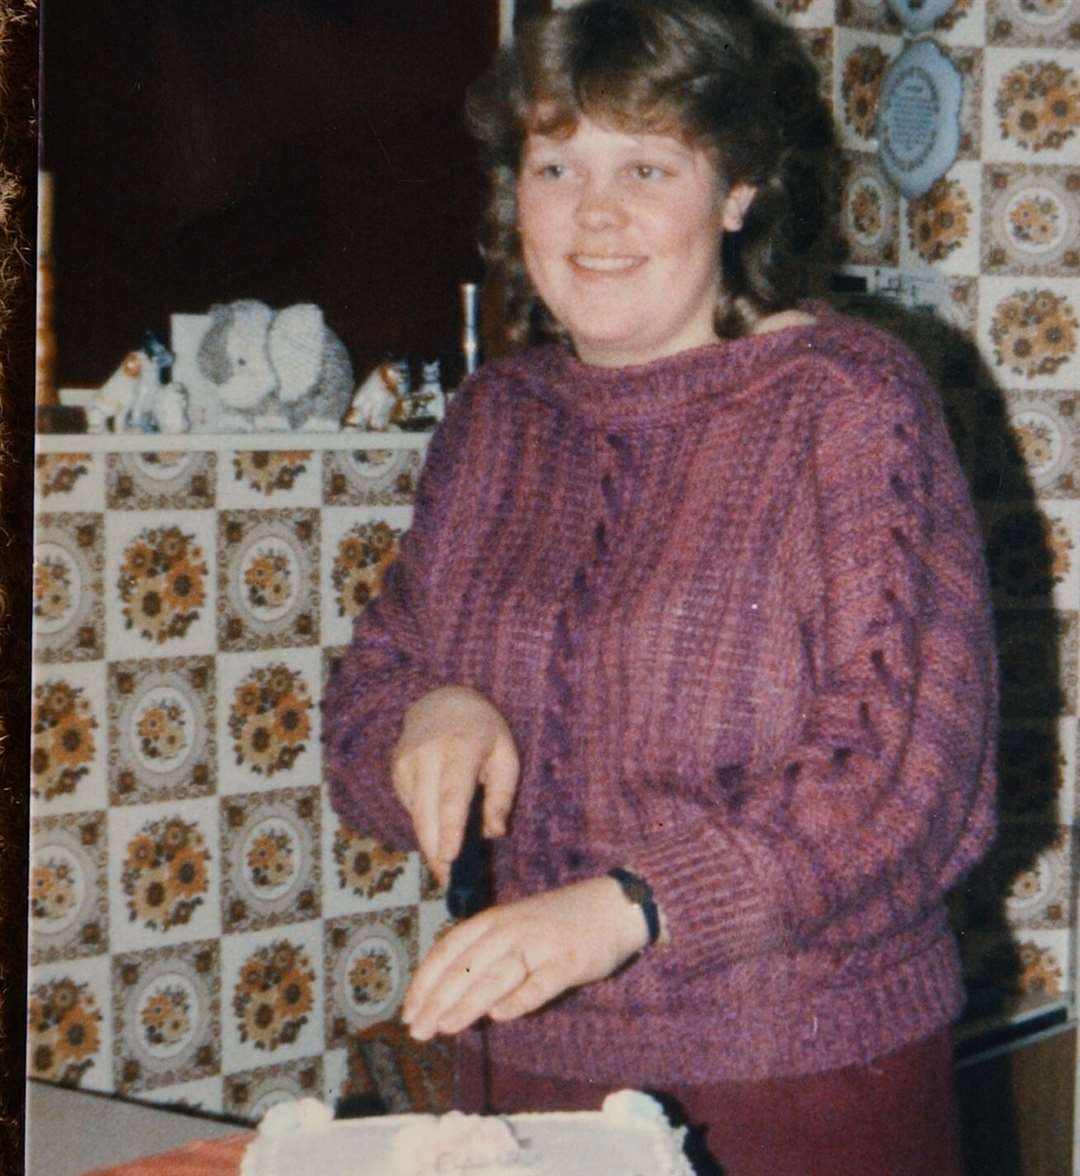 Debbie Griggs during happier times at her home in Deal before she went missing